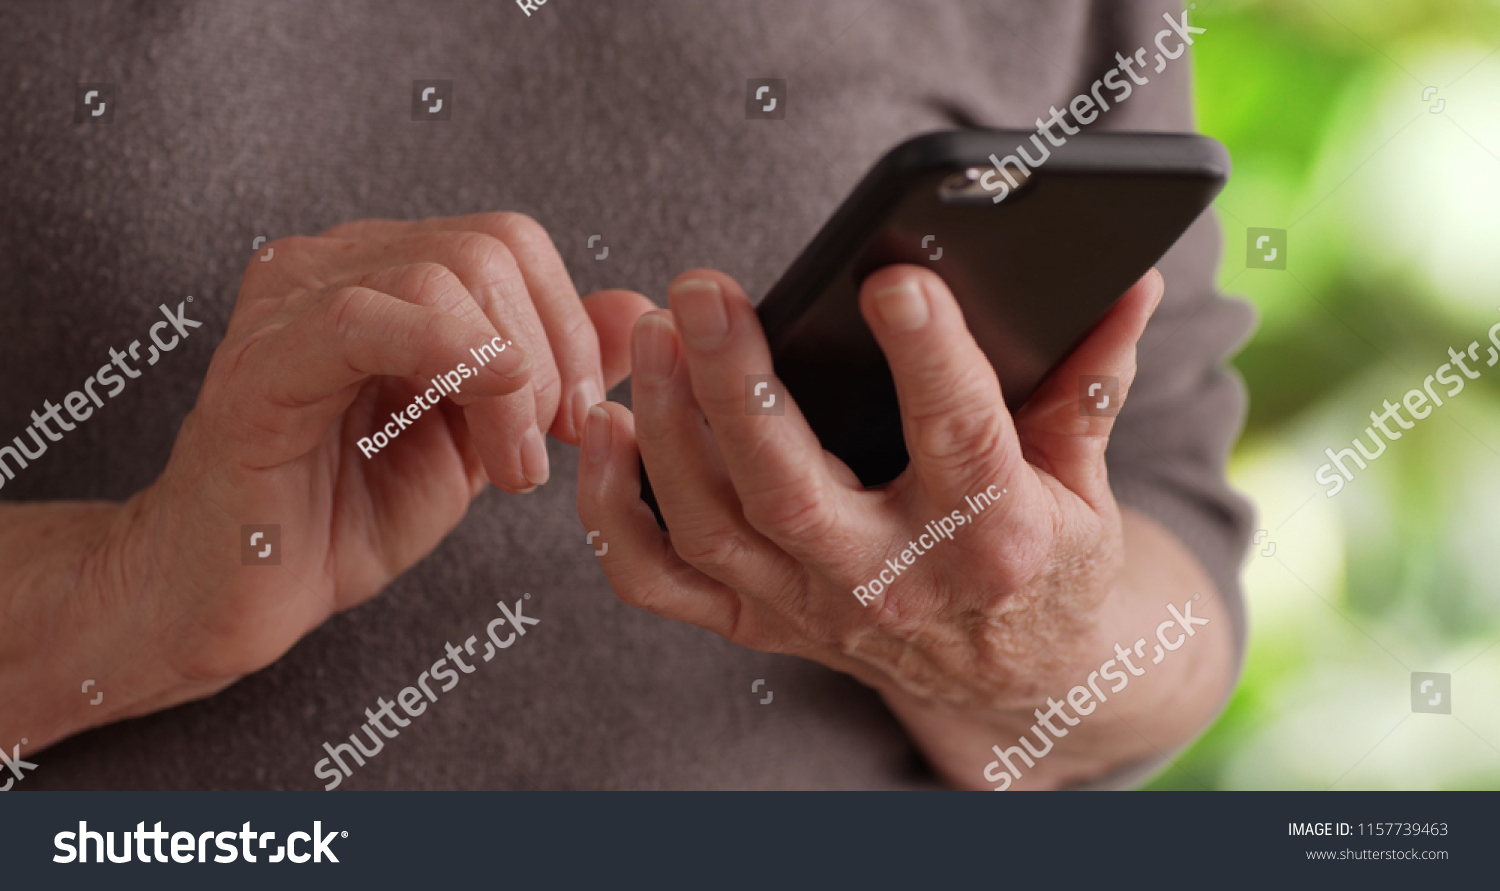 Tight shot of senior person's hands holding cell phone texting in nature setting #1157739463